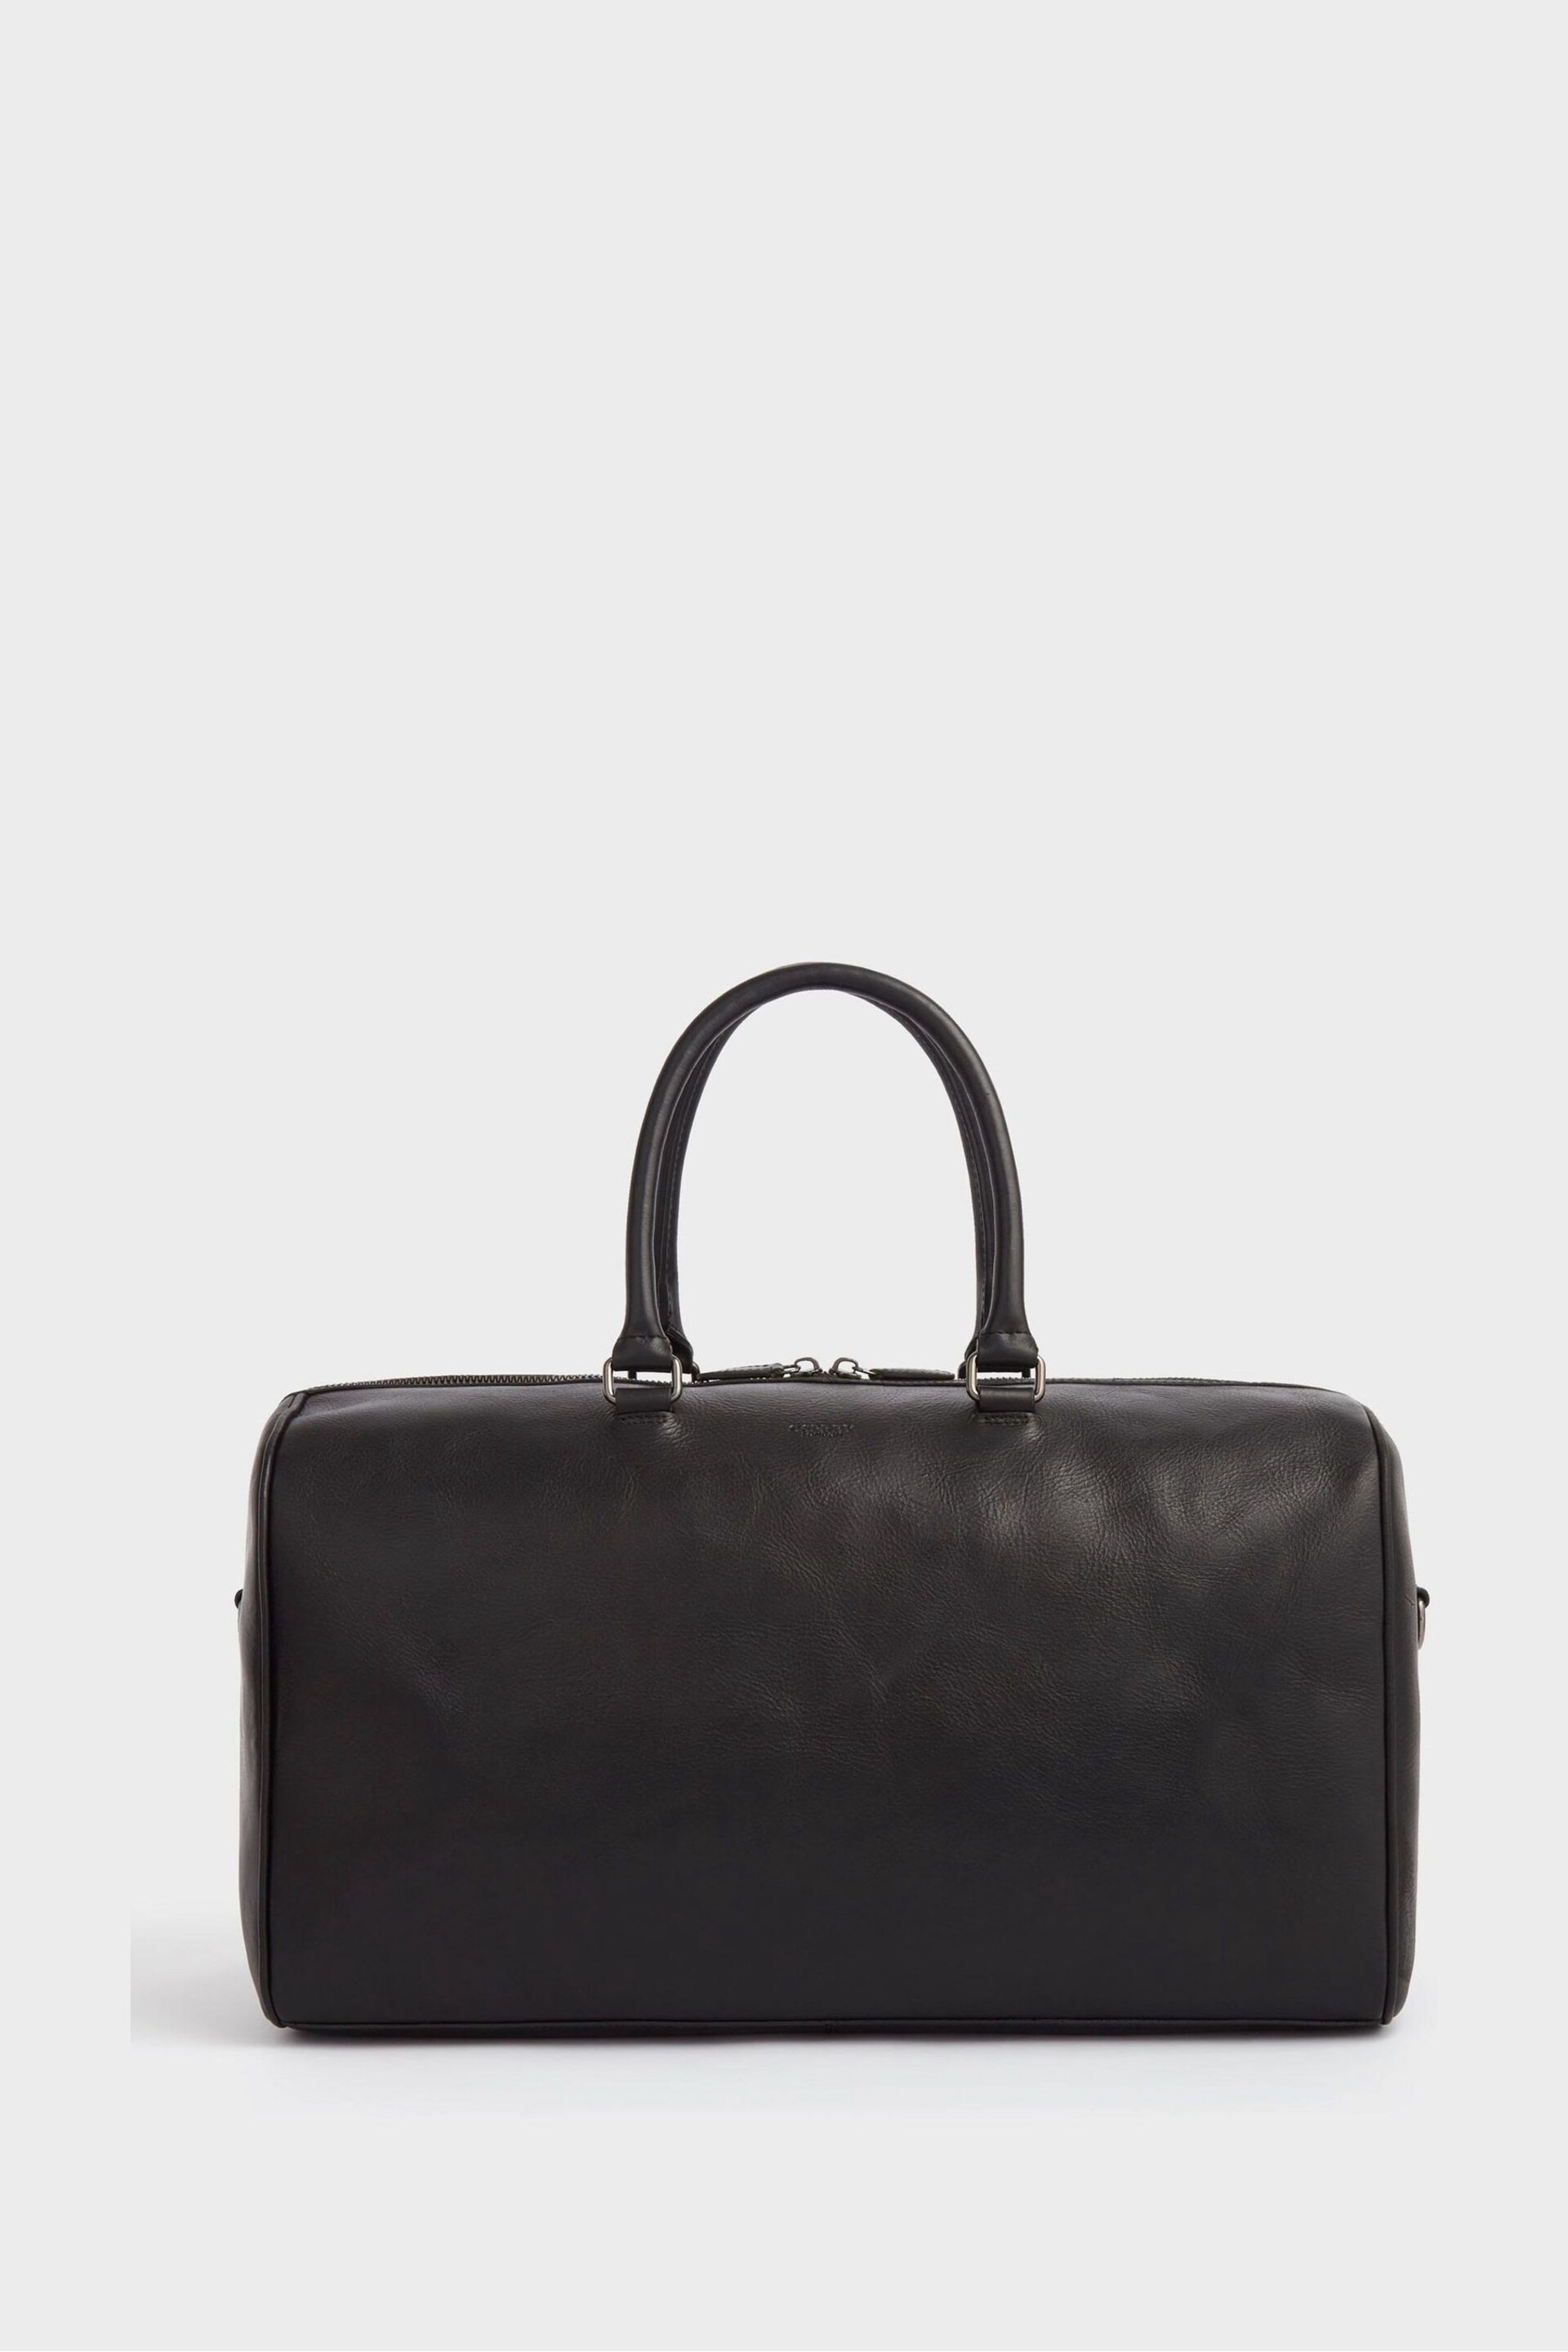 OSPREY LONDON The Carter Leather Weekend Holdall Bag - Image 4 of 5